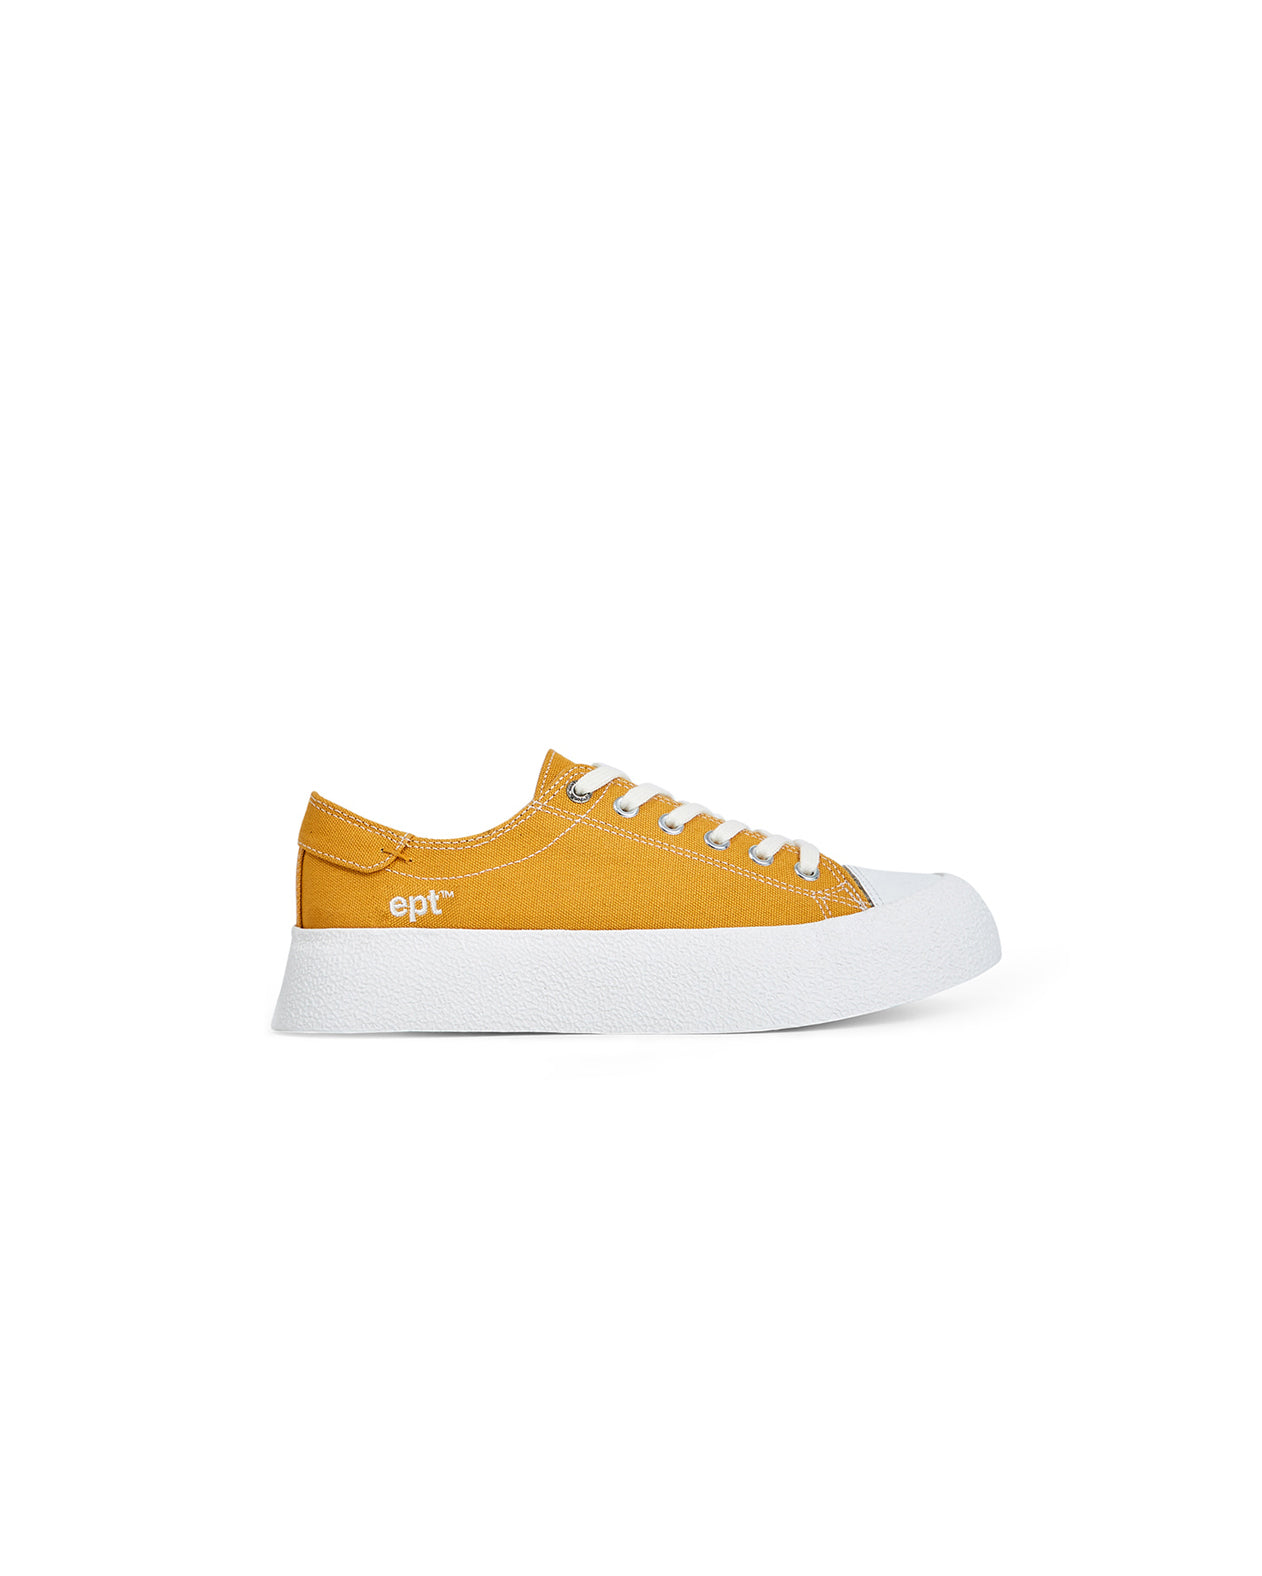 Dive shoes - Mustard Yellow